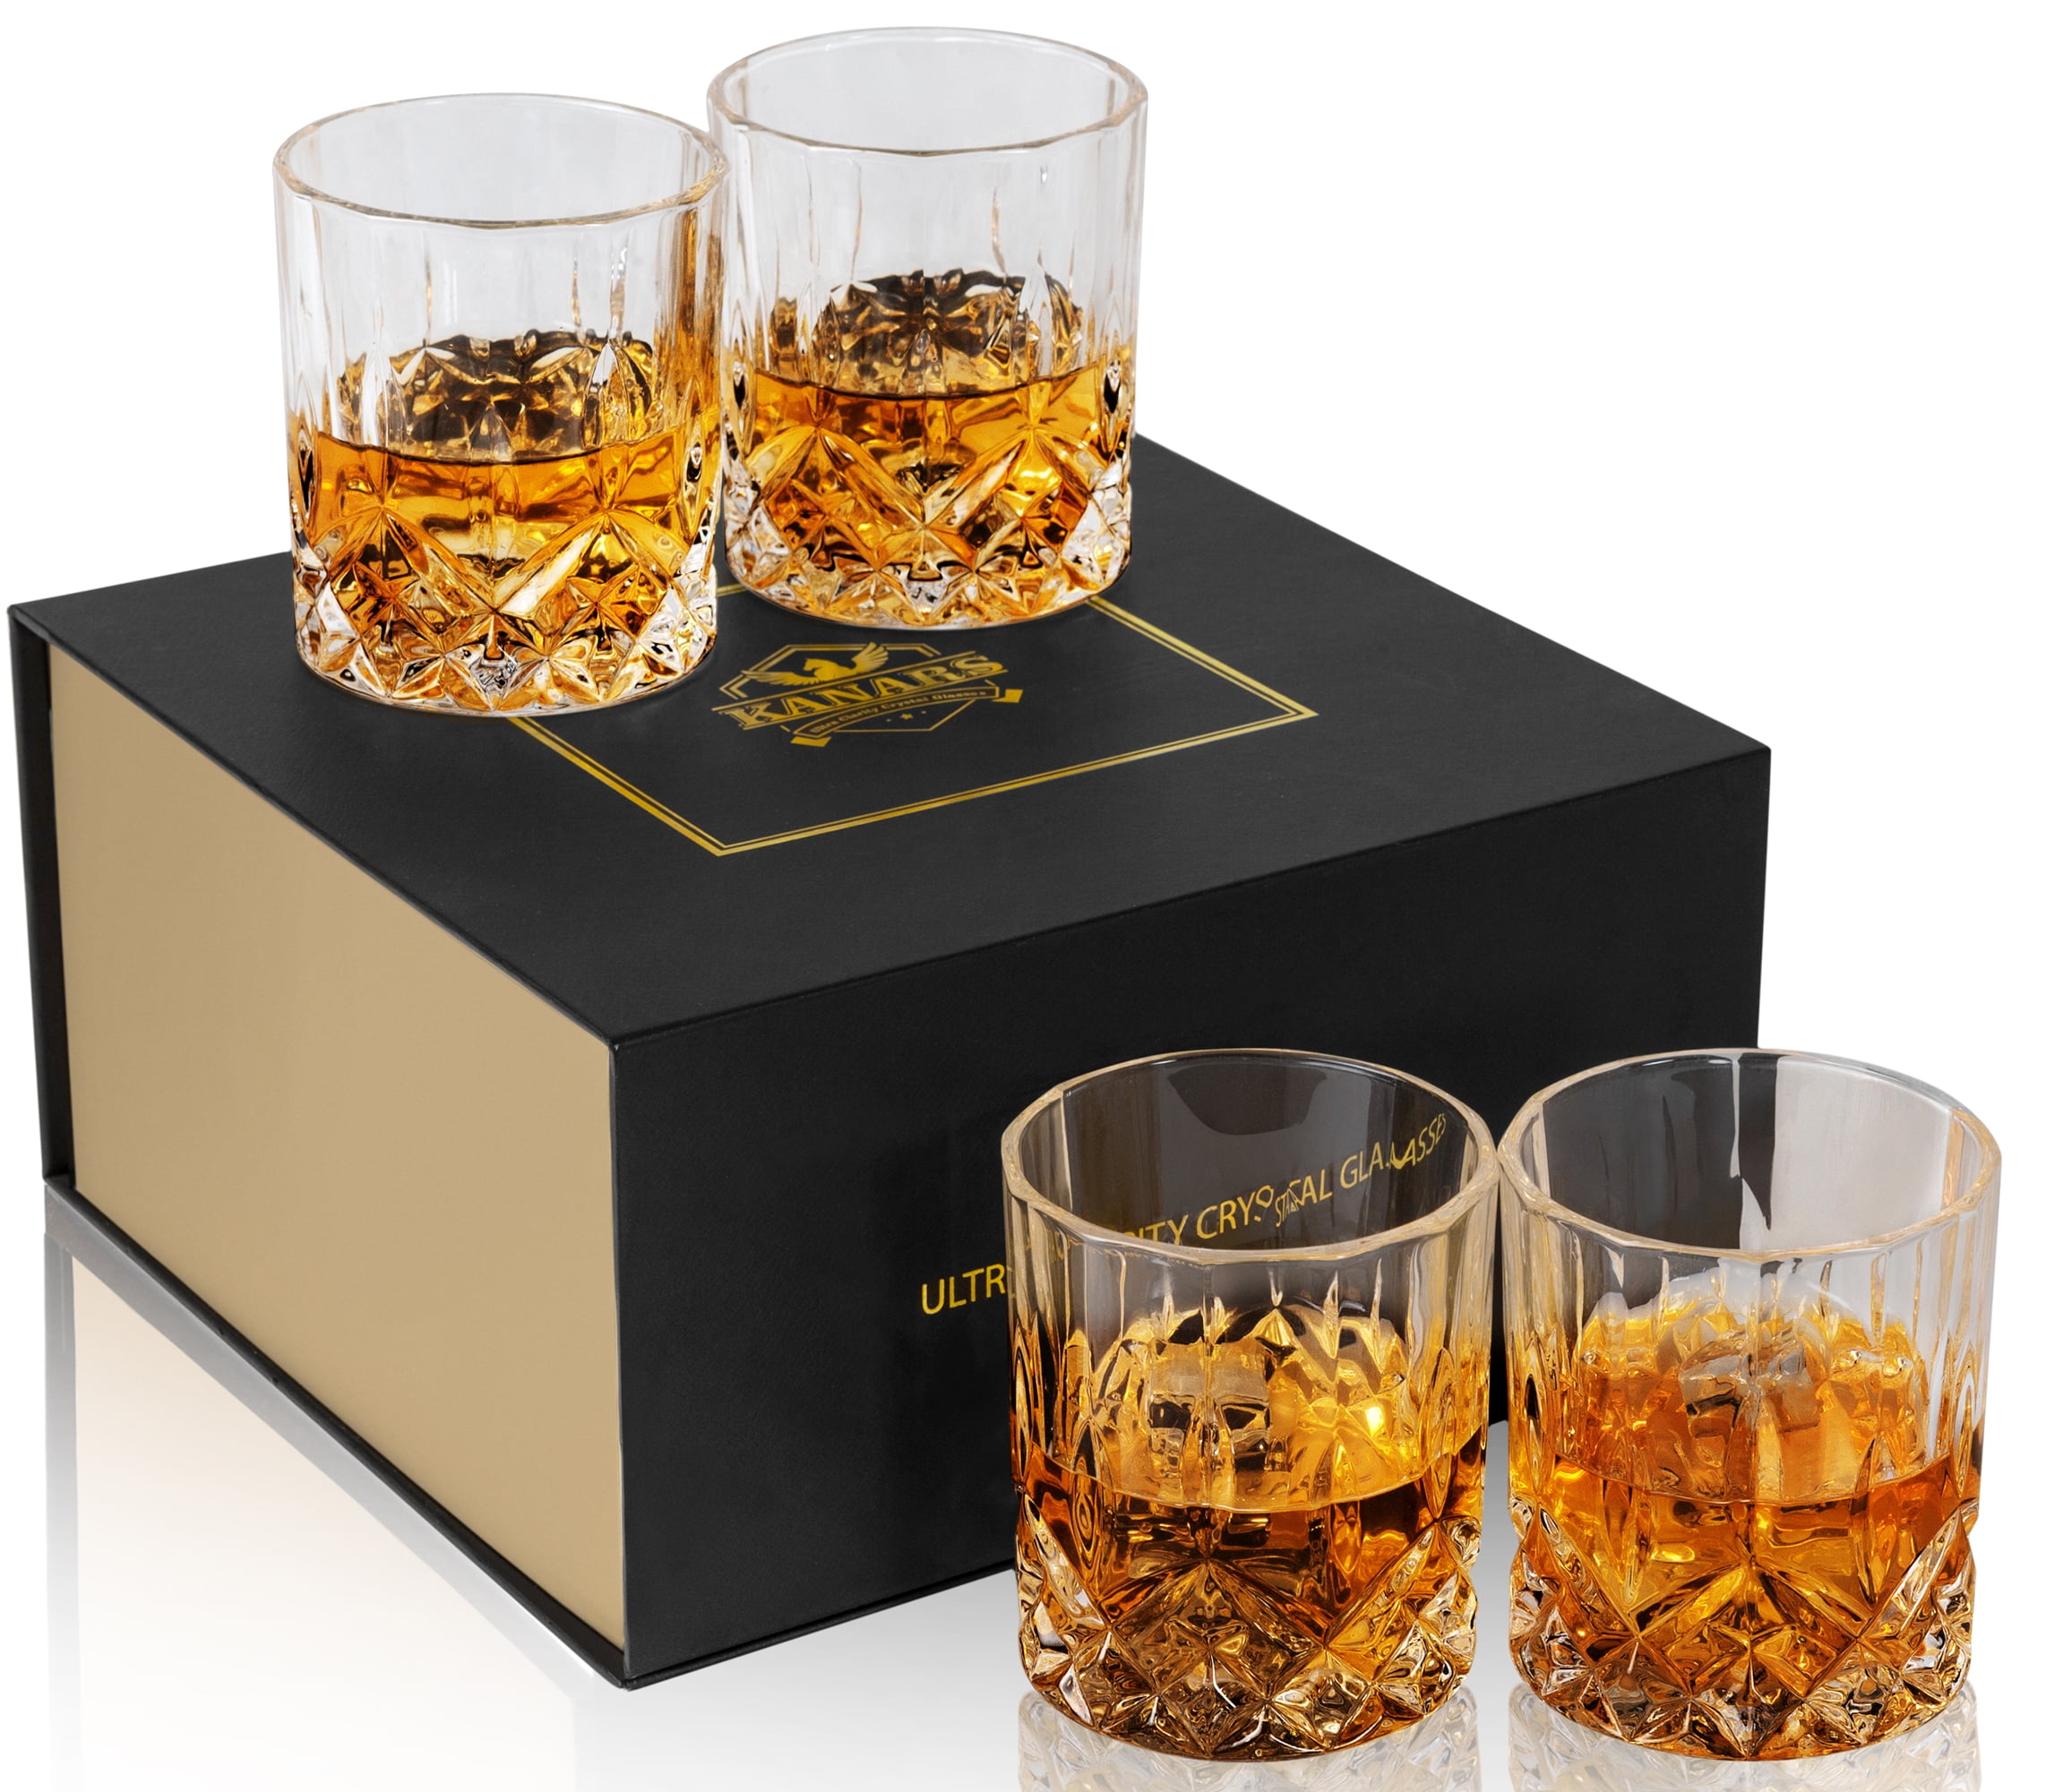 Vodka Crystal Whiskey Glass Set of 4 in Luxury Gift Box Liquor Rum Cognac 4 Rocks Whisky Tumblers for Drinking Scotch Cocktails Home Bar Glasses Gift Idea Bourbon Whiskey Glasses Gift Set